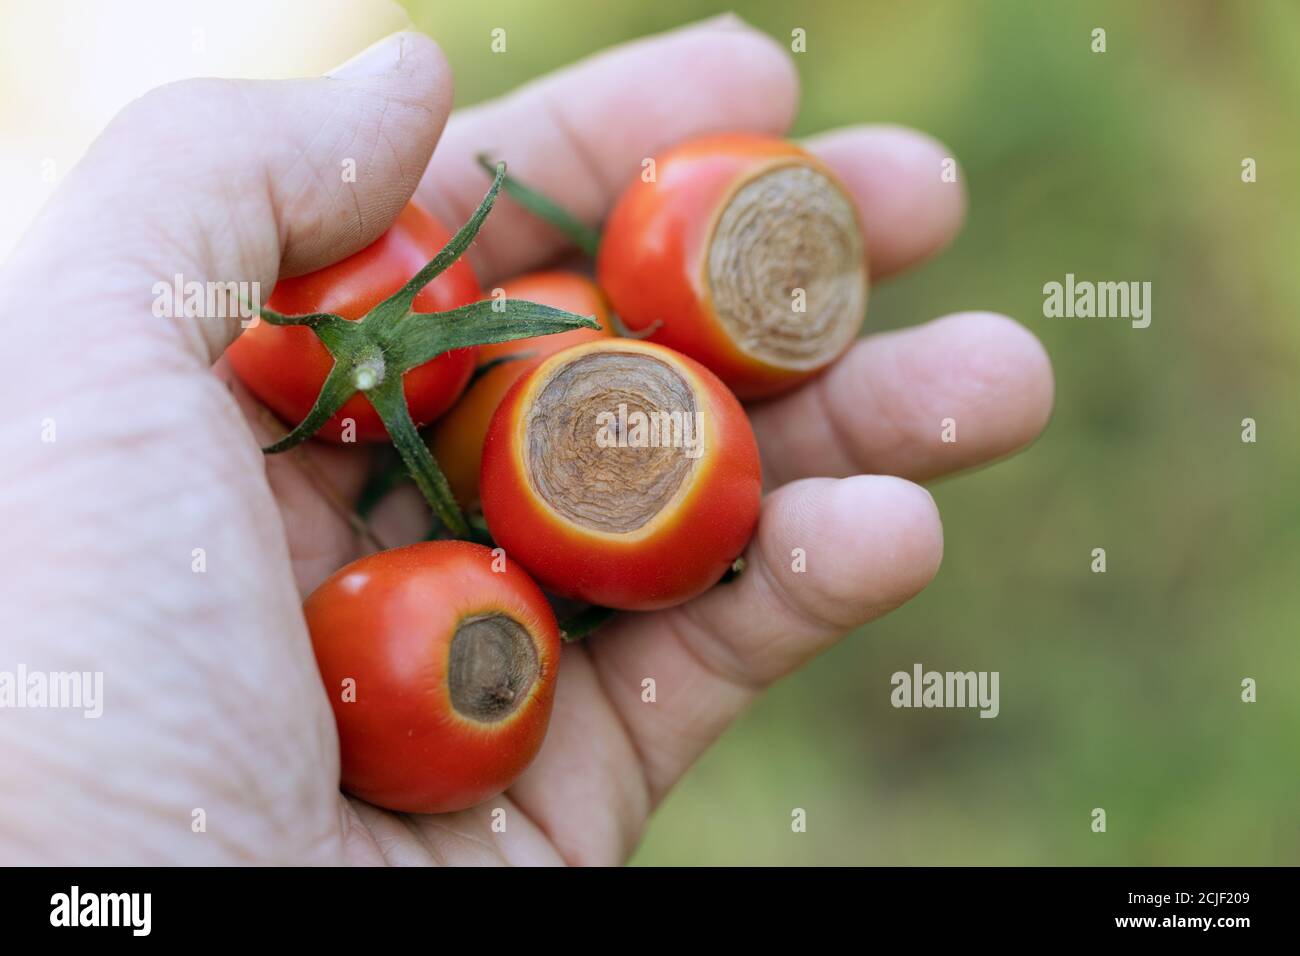 Sick Cherry tomatoes affected by disease vertex rot in hand Stock Photo